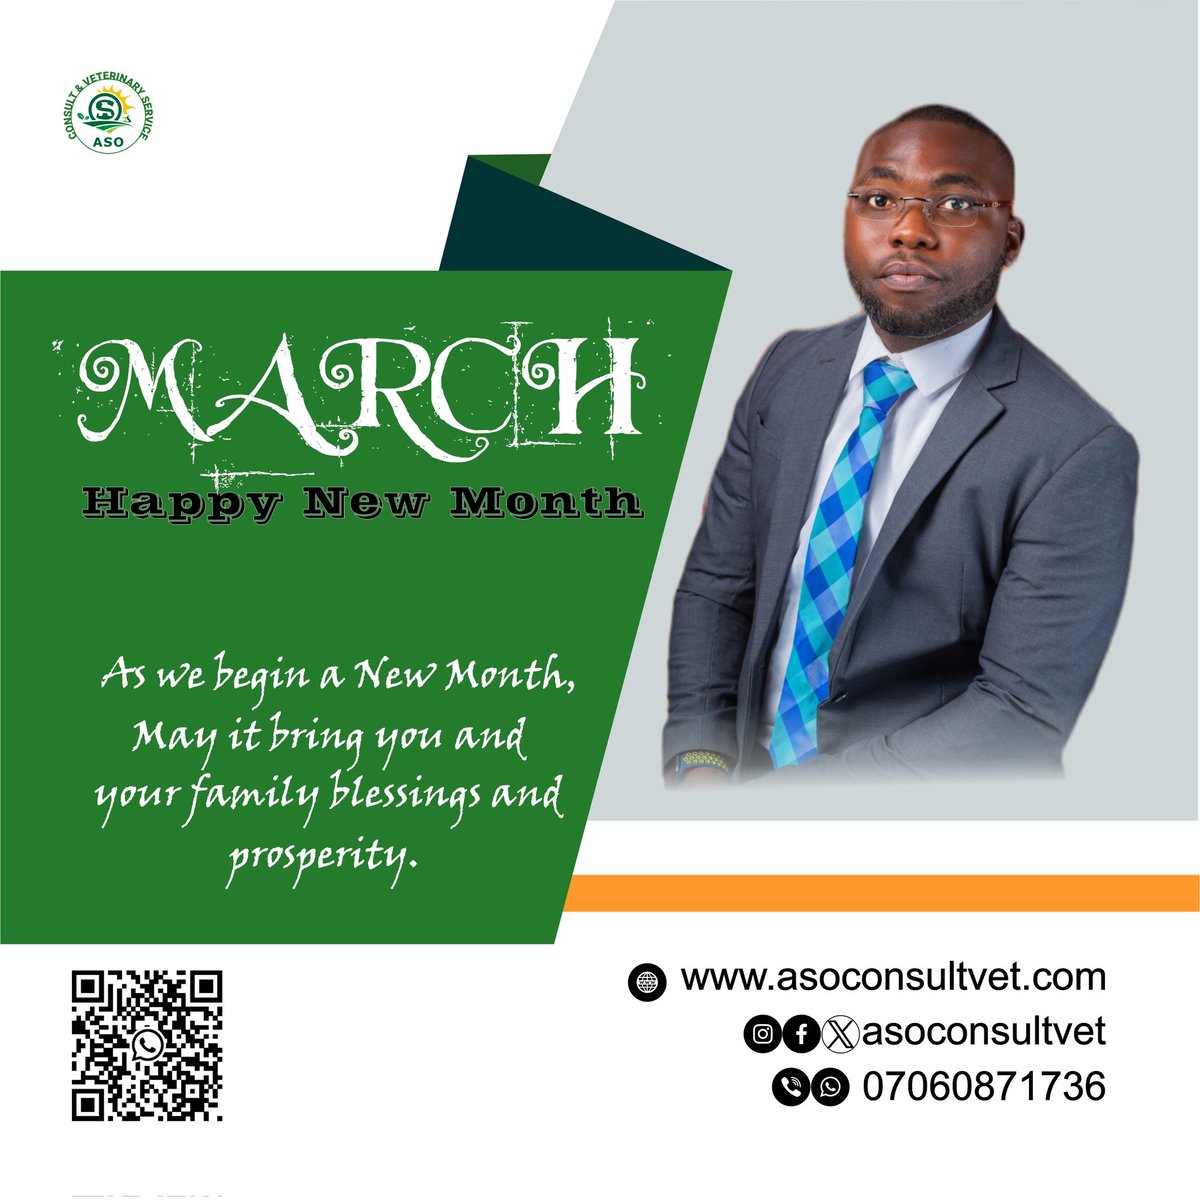 Happy beginning of the month... Let us assist you in running your farm to generate and maintain profits, including raising livestock and crops.